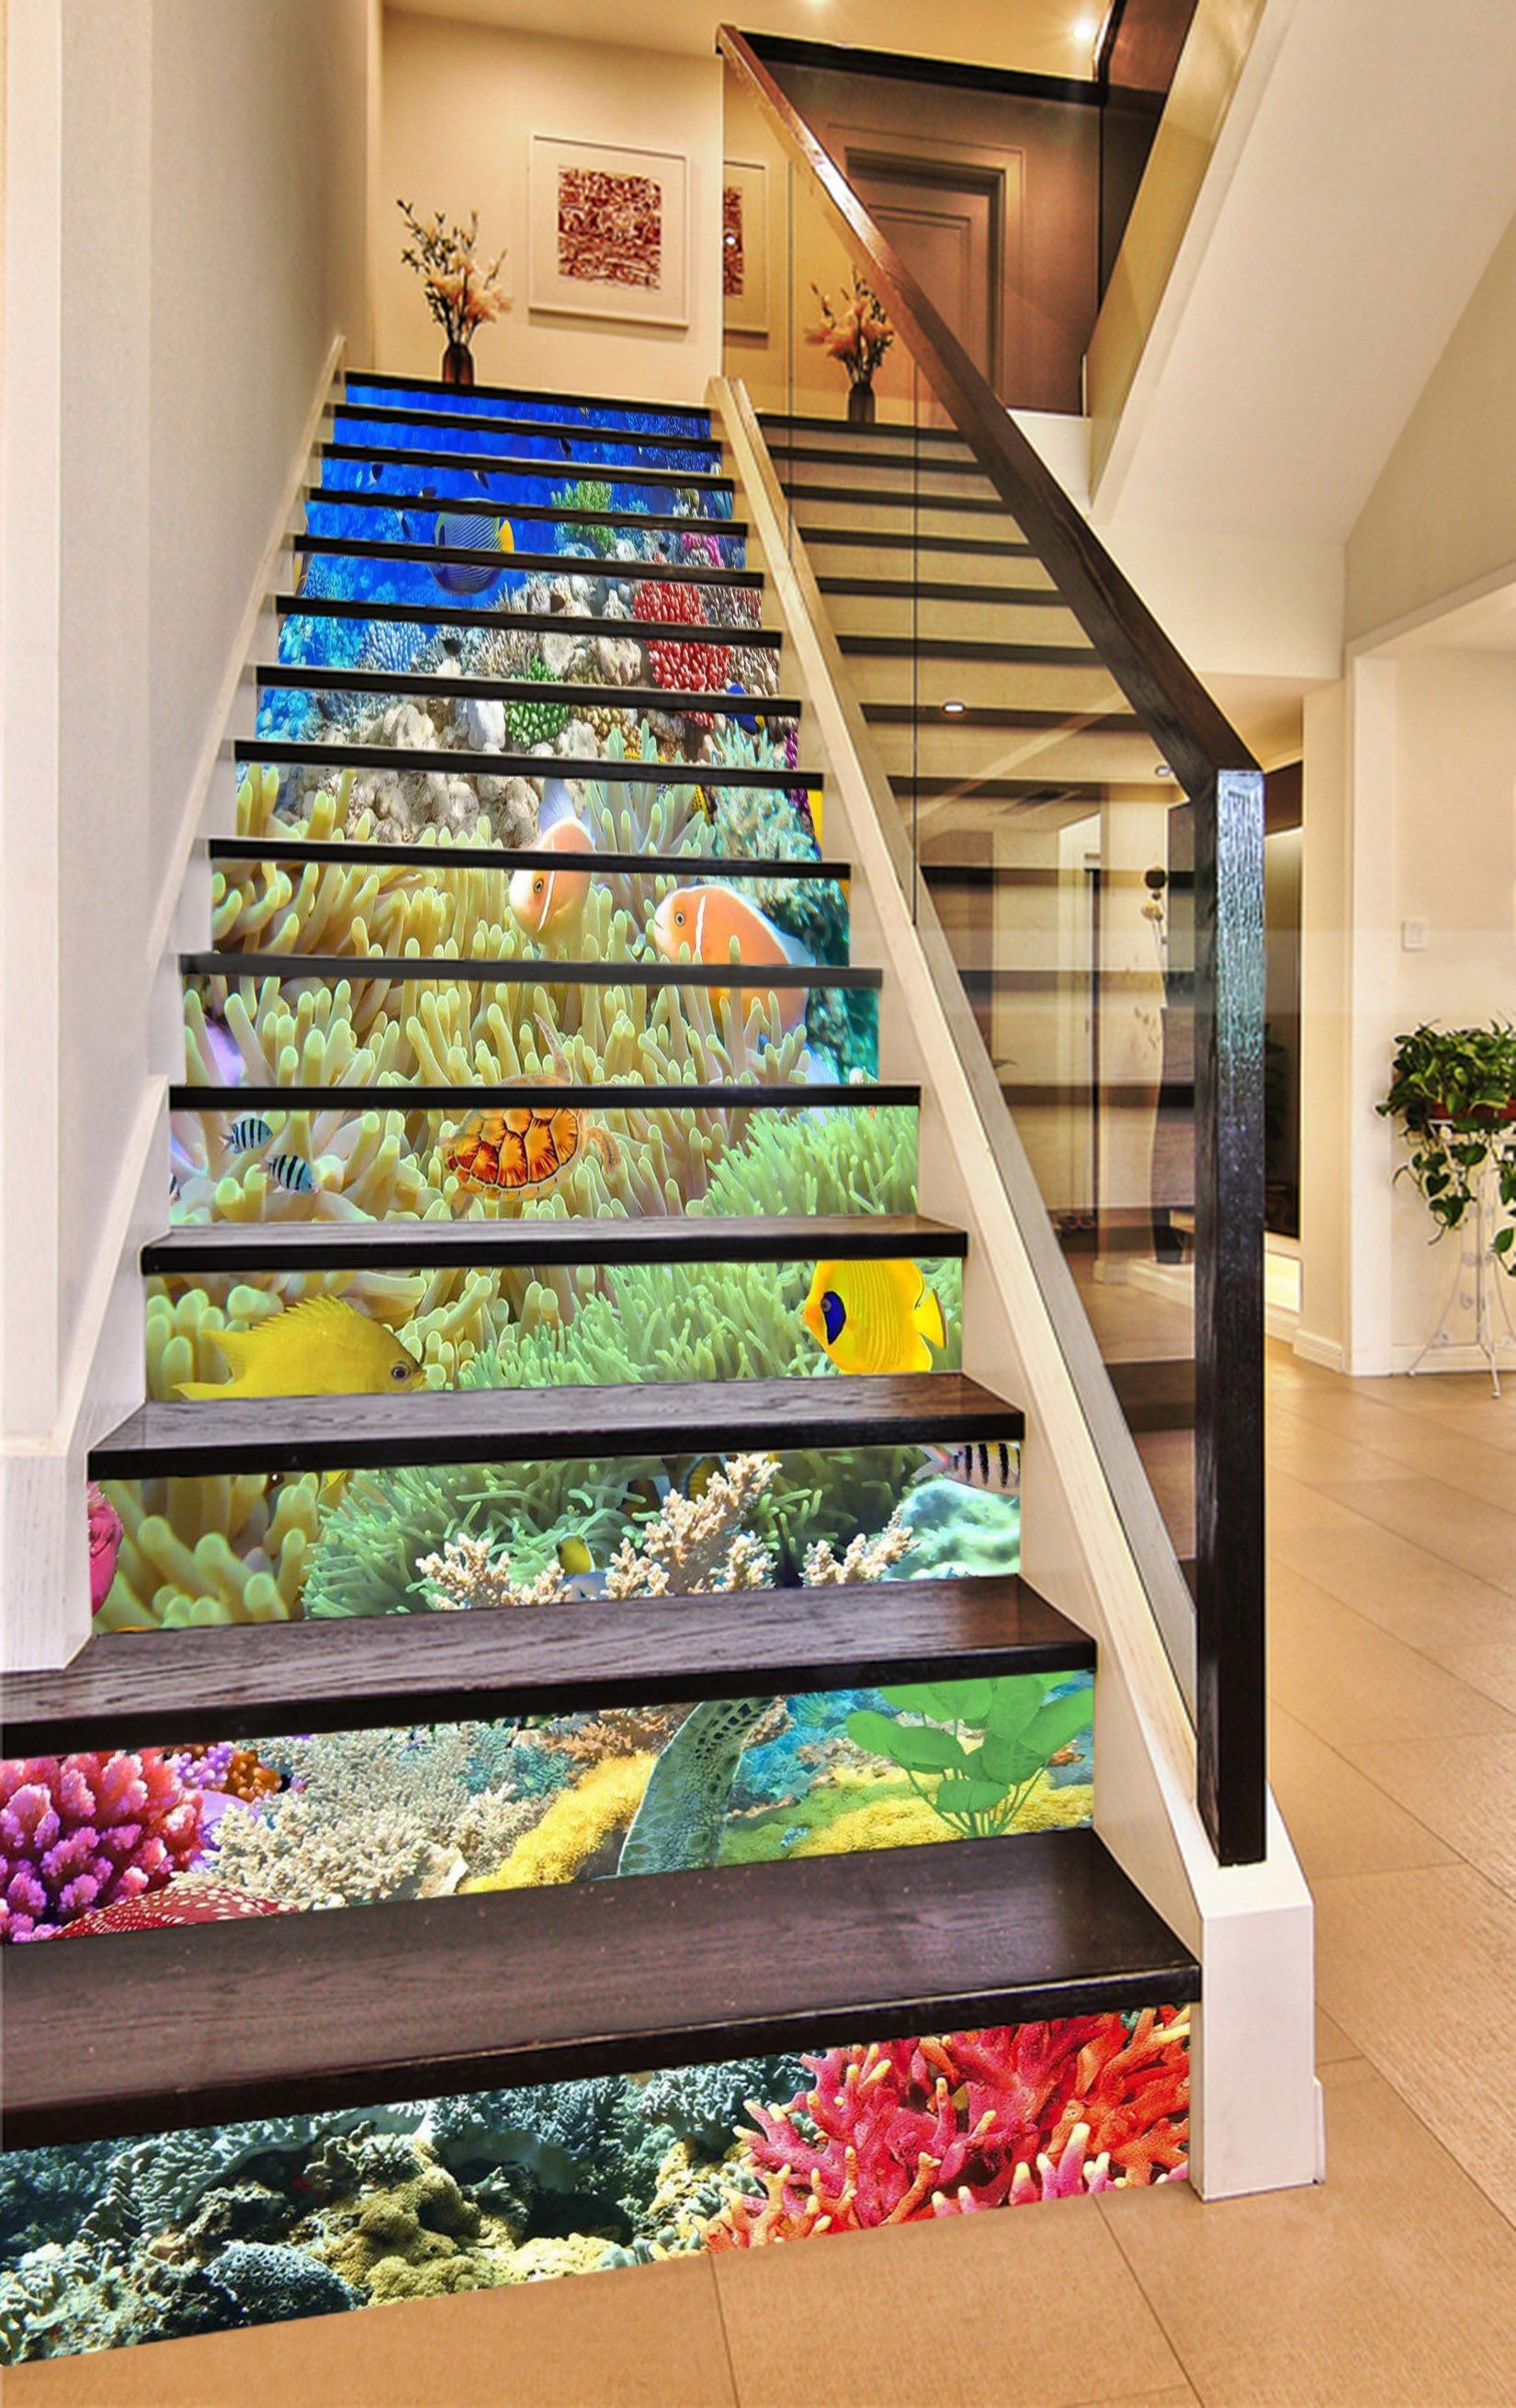 3D Seabed Corals Fishes 424 Stair Risers Wallpaper AJ Wallpaper 